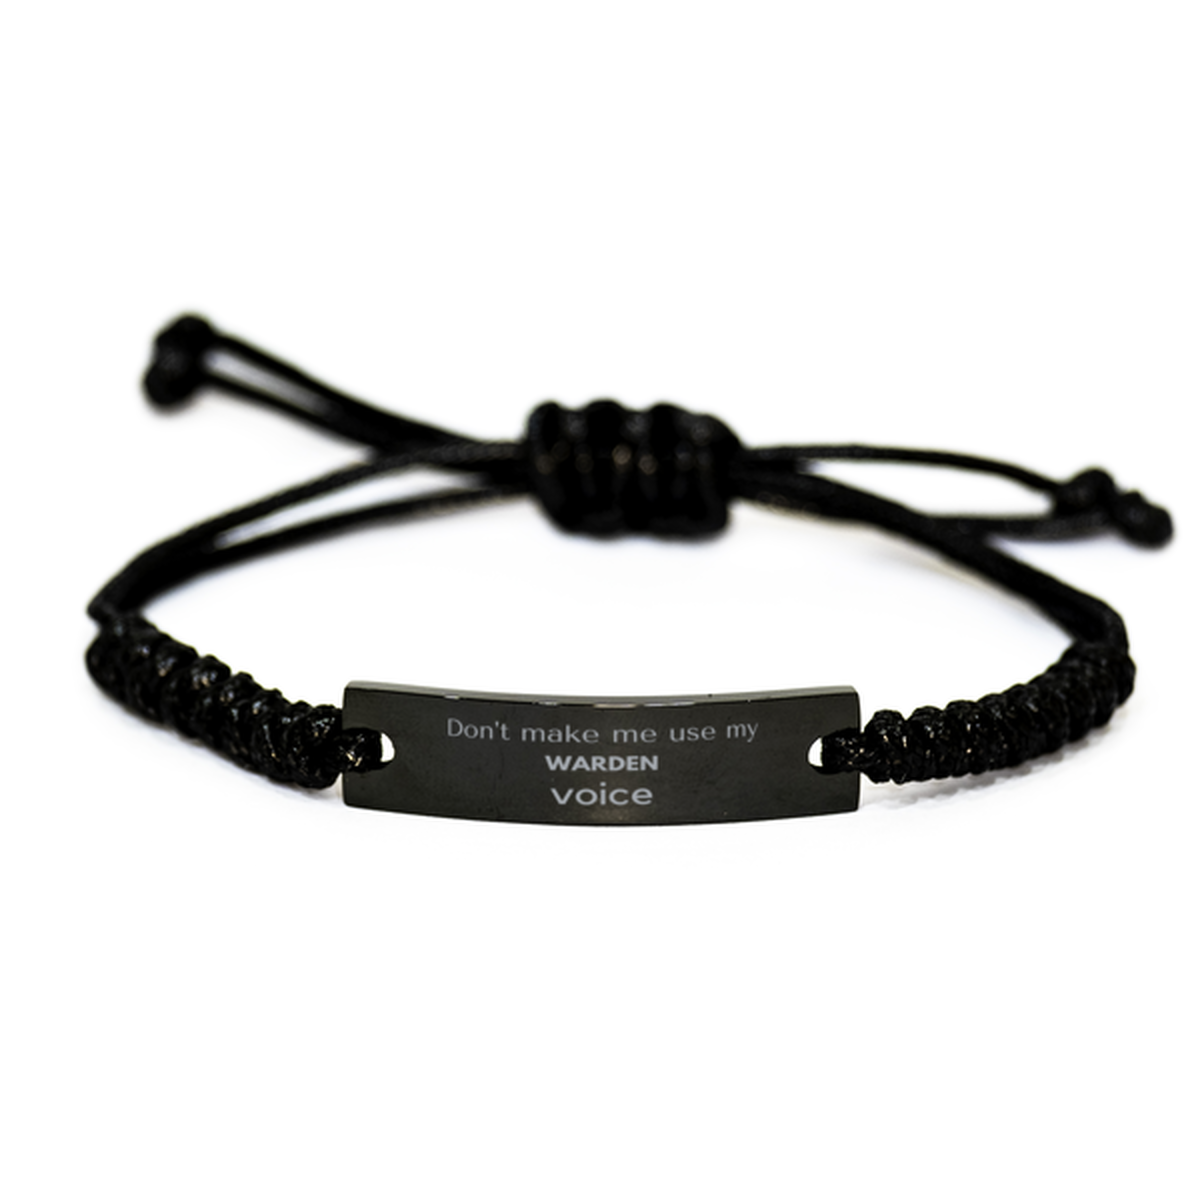 Don't make me use my Warden voice, Sarcasm Warden Gifts, Christmas Warden Black Rope Bracelet Birthday Unique Gifts For Warden Coworkers, Men, Women, Colleague, Friends